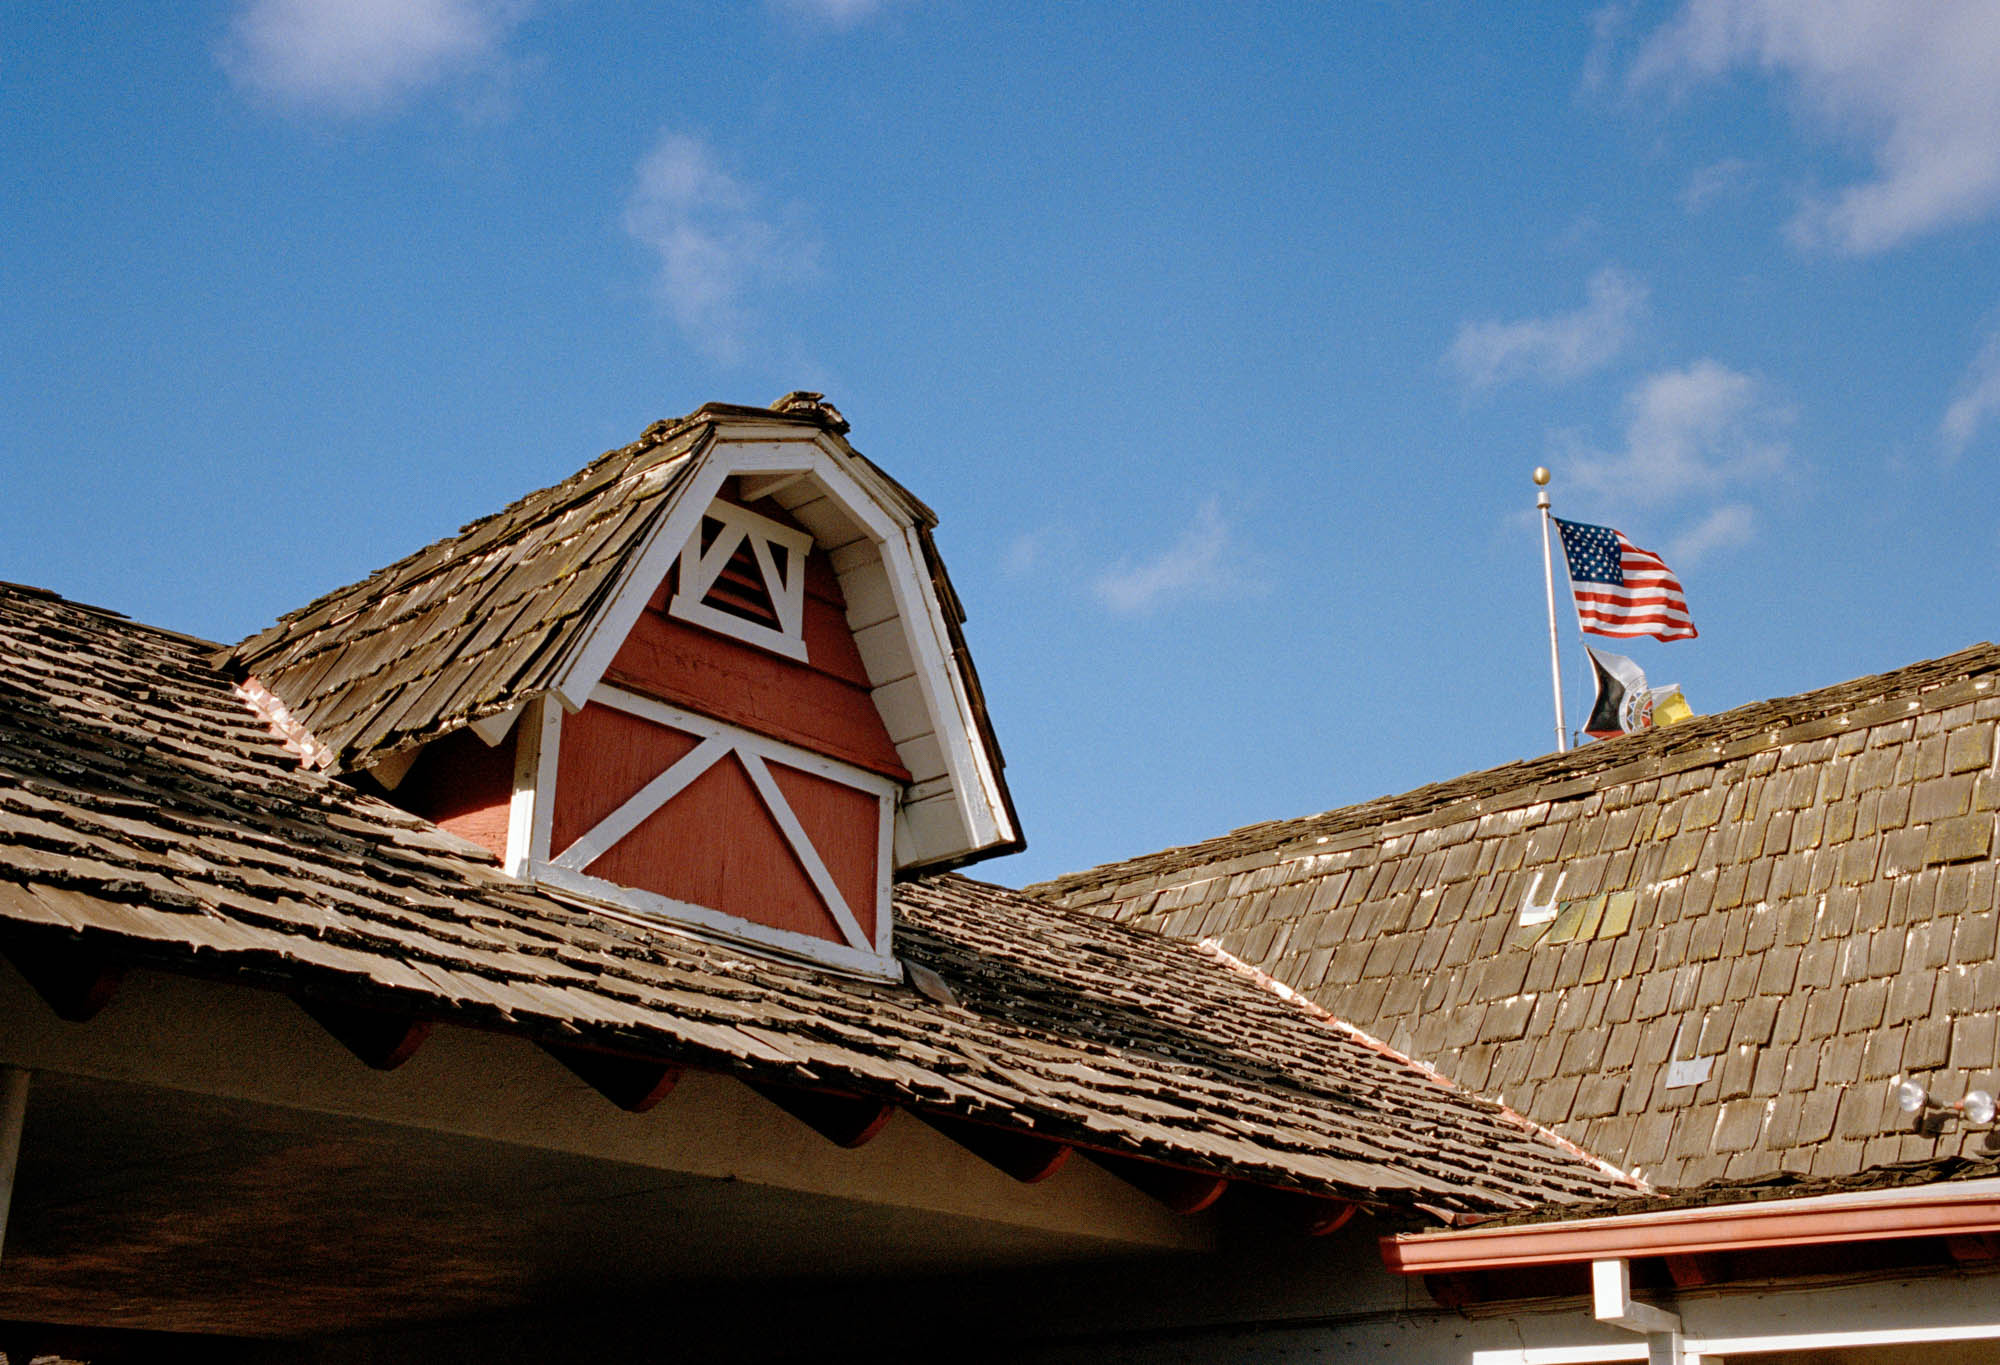 A vintage motel with shingle roof tiles & farmhouse barn roof features. There is an American flag on the roof. There are blue skies.